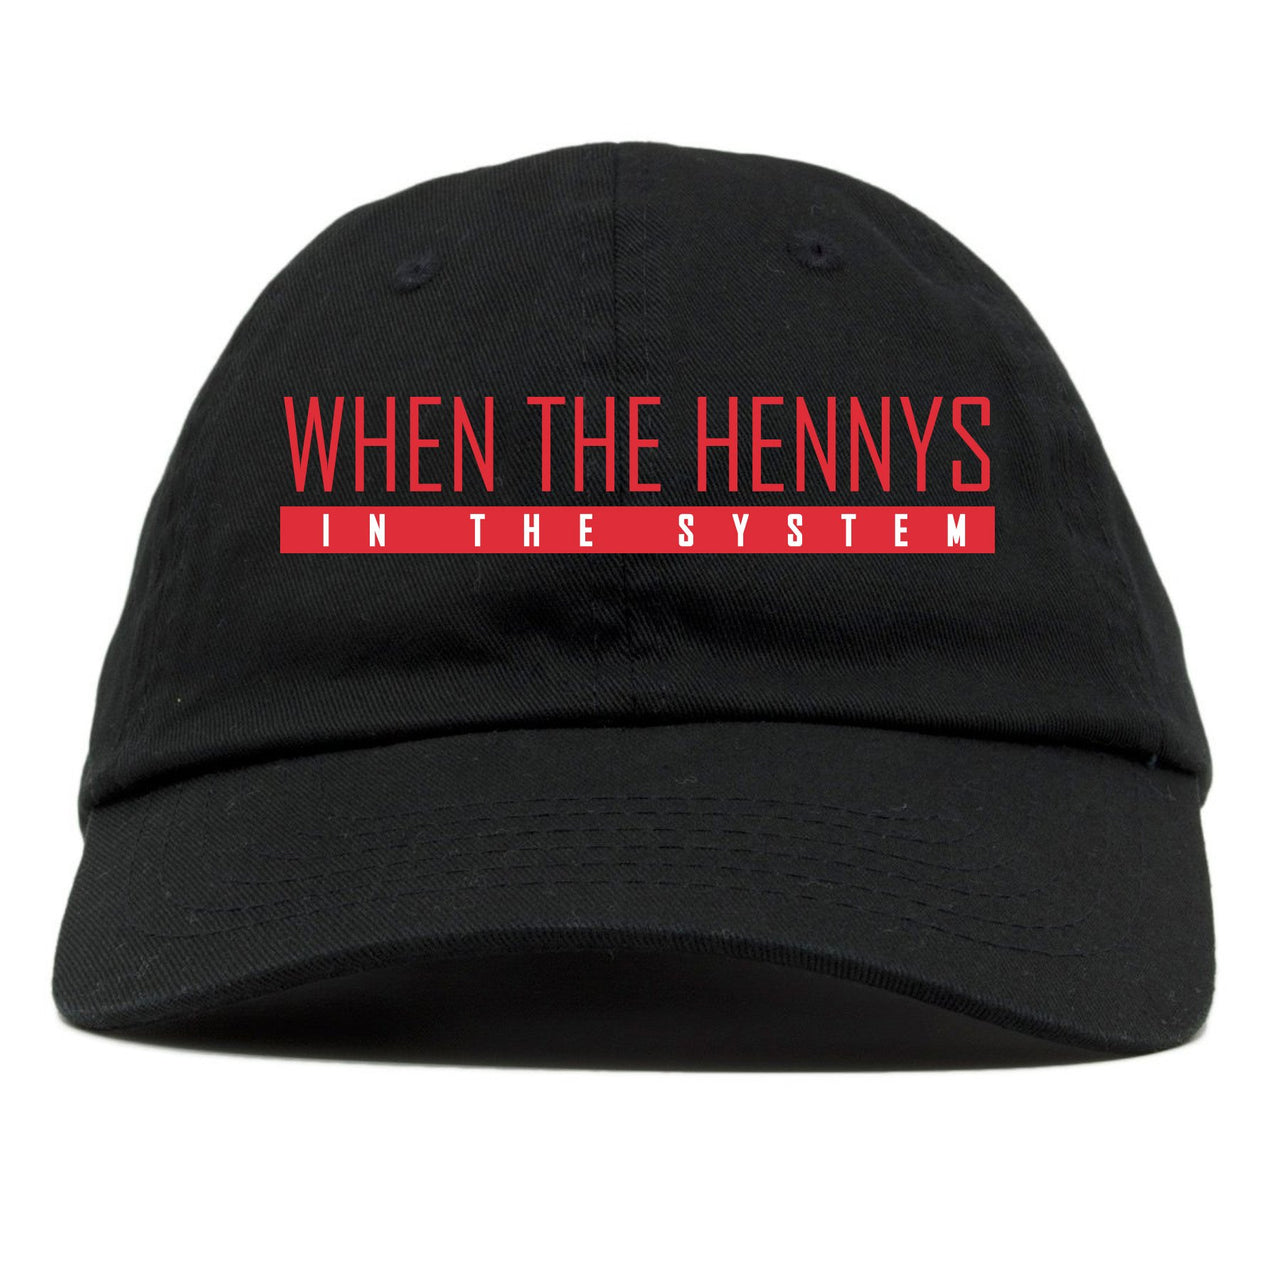 Bred 2019 4s Dad Hat | When the Hennys, Black